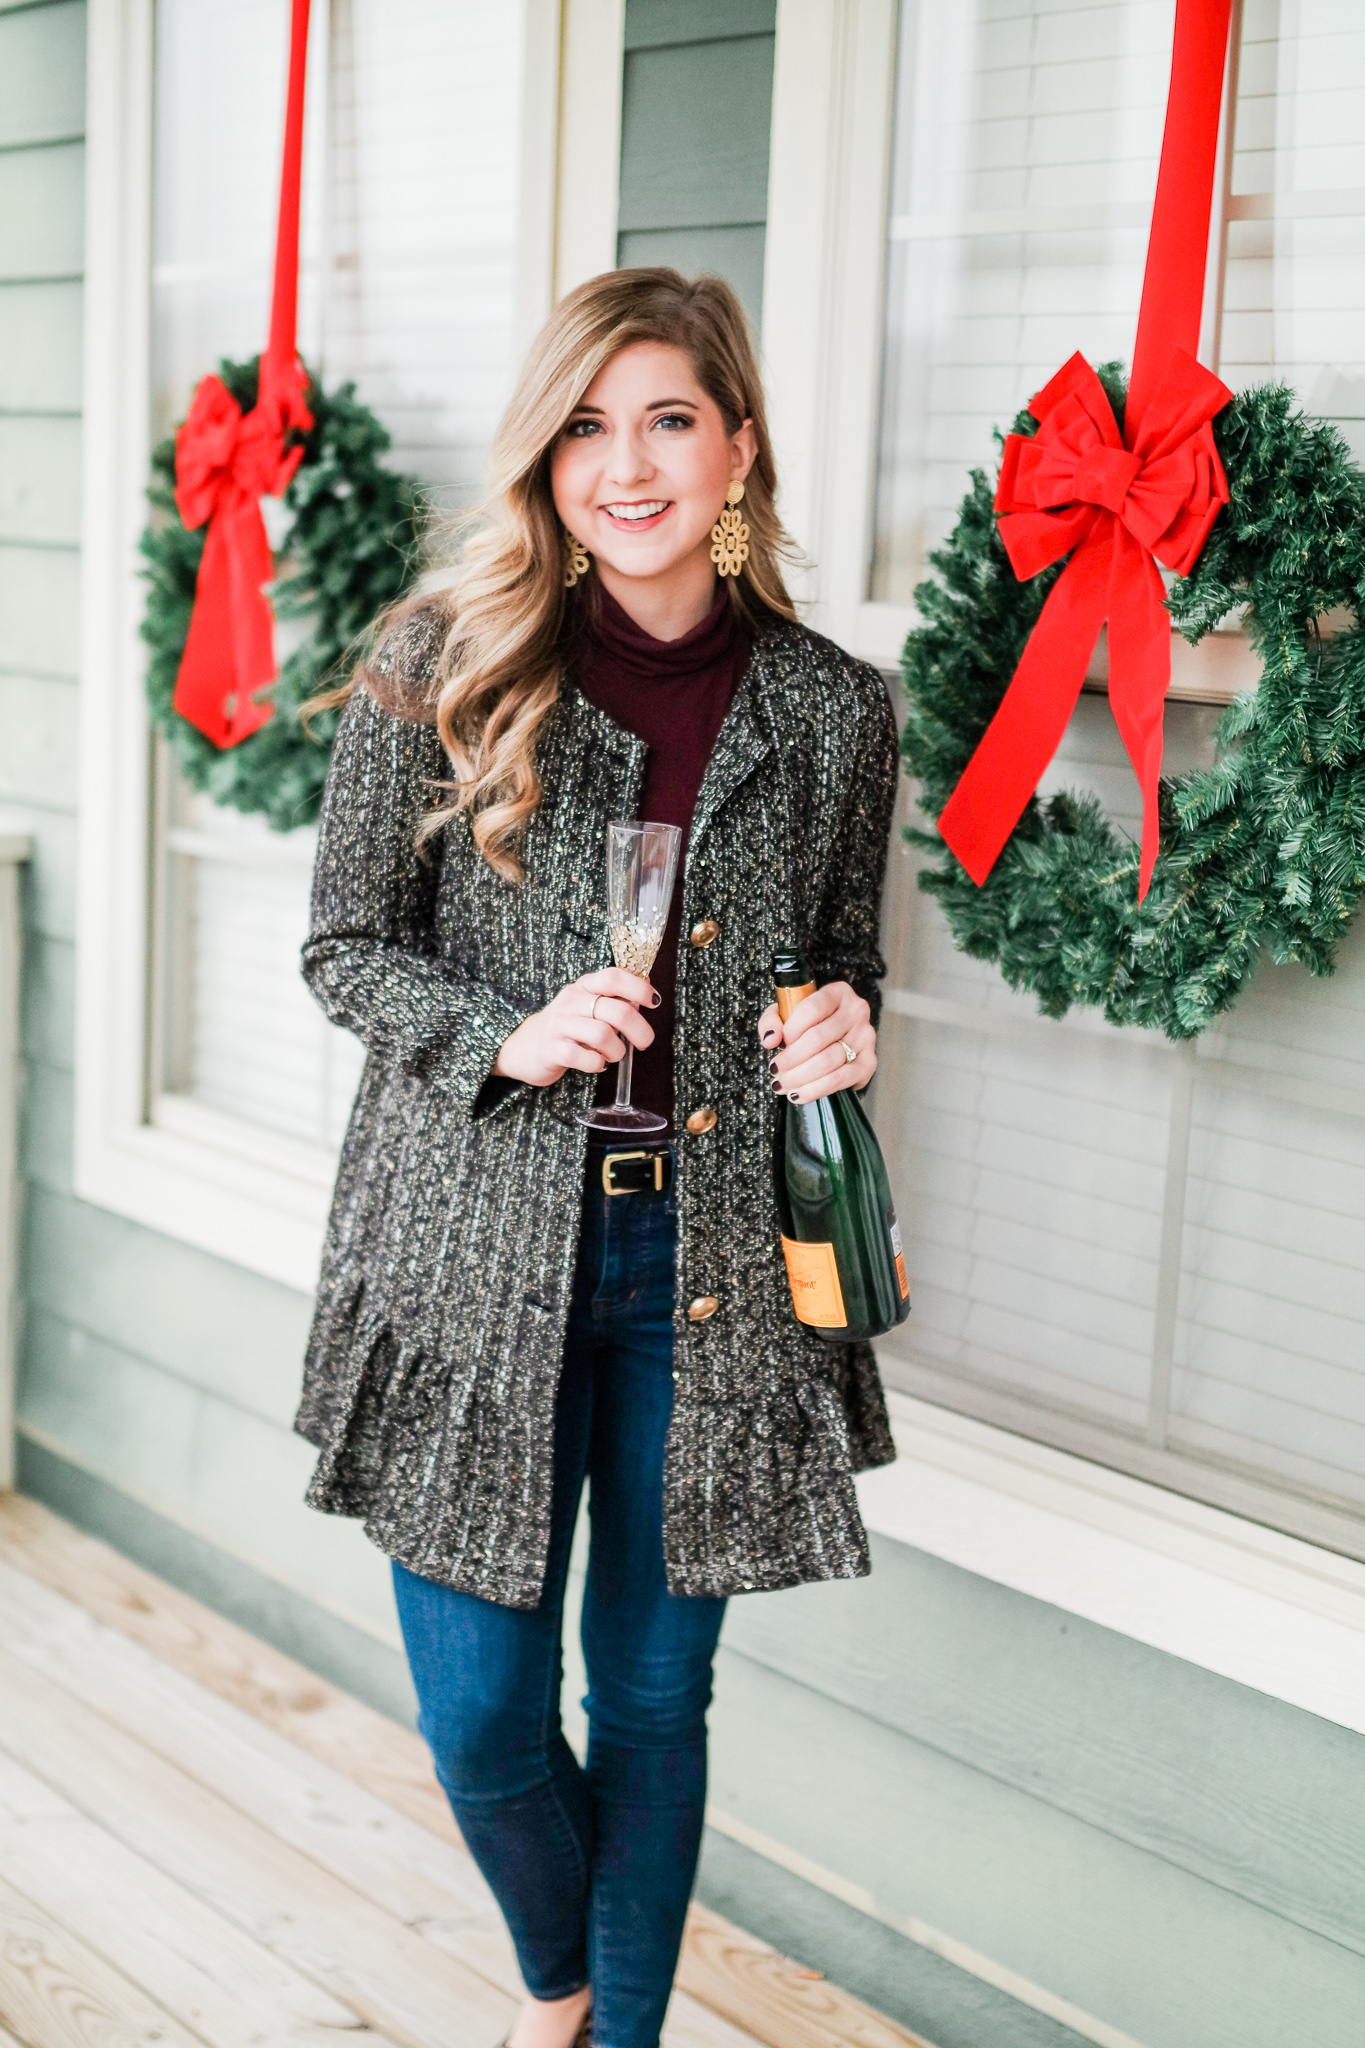 What To Wear To A Work Christmas Party - Thrifty Pineapple